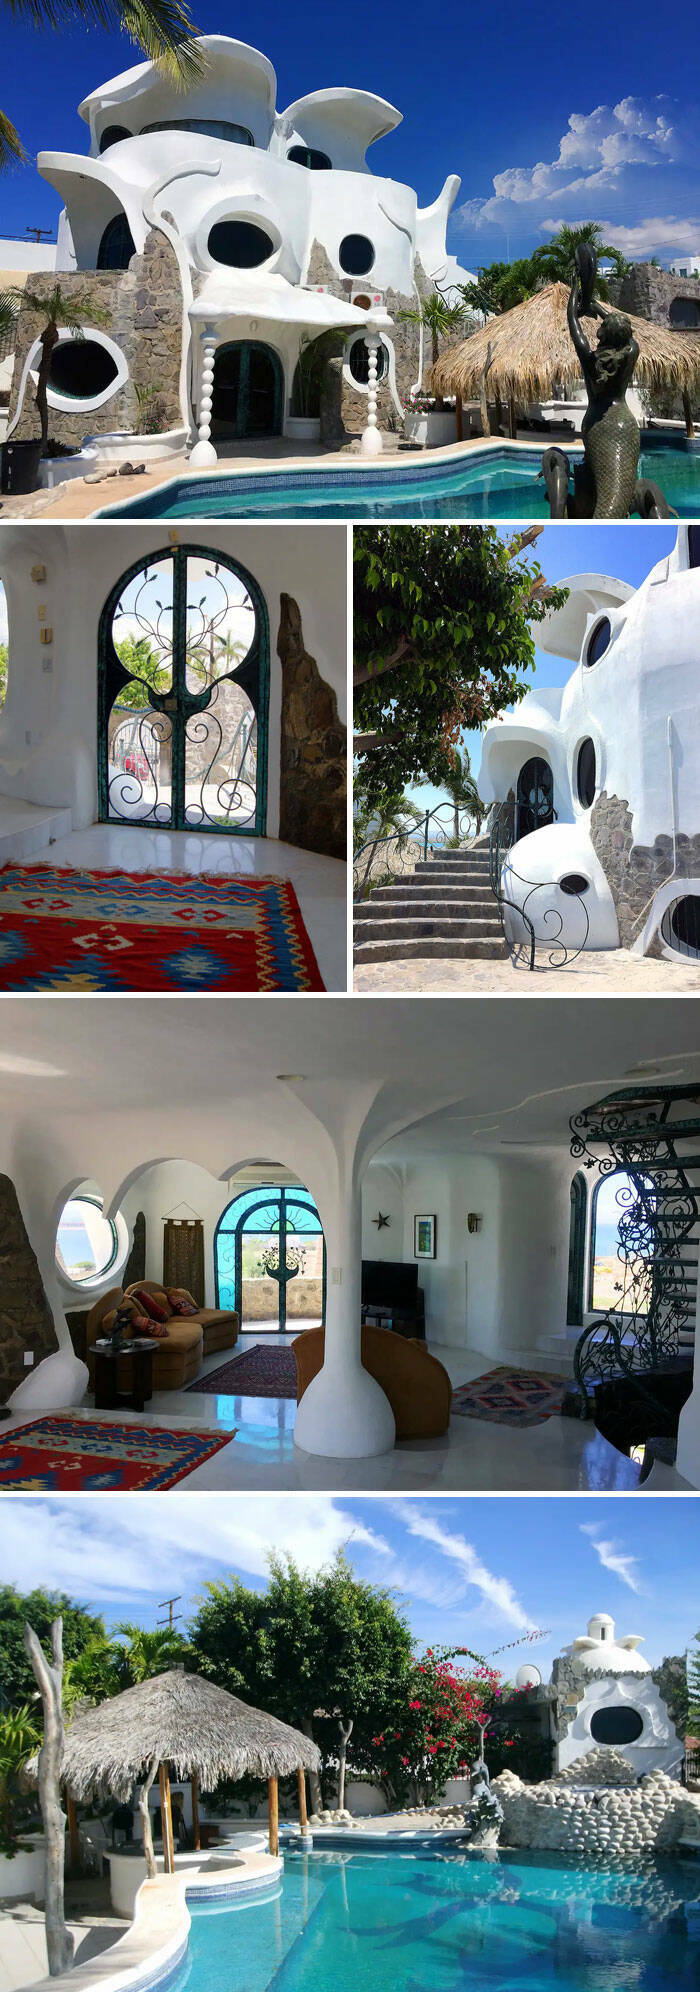 Unique Airbnb Stays That Will Make Your Trip Unforgettable